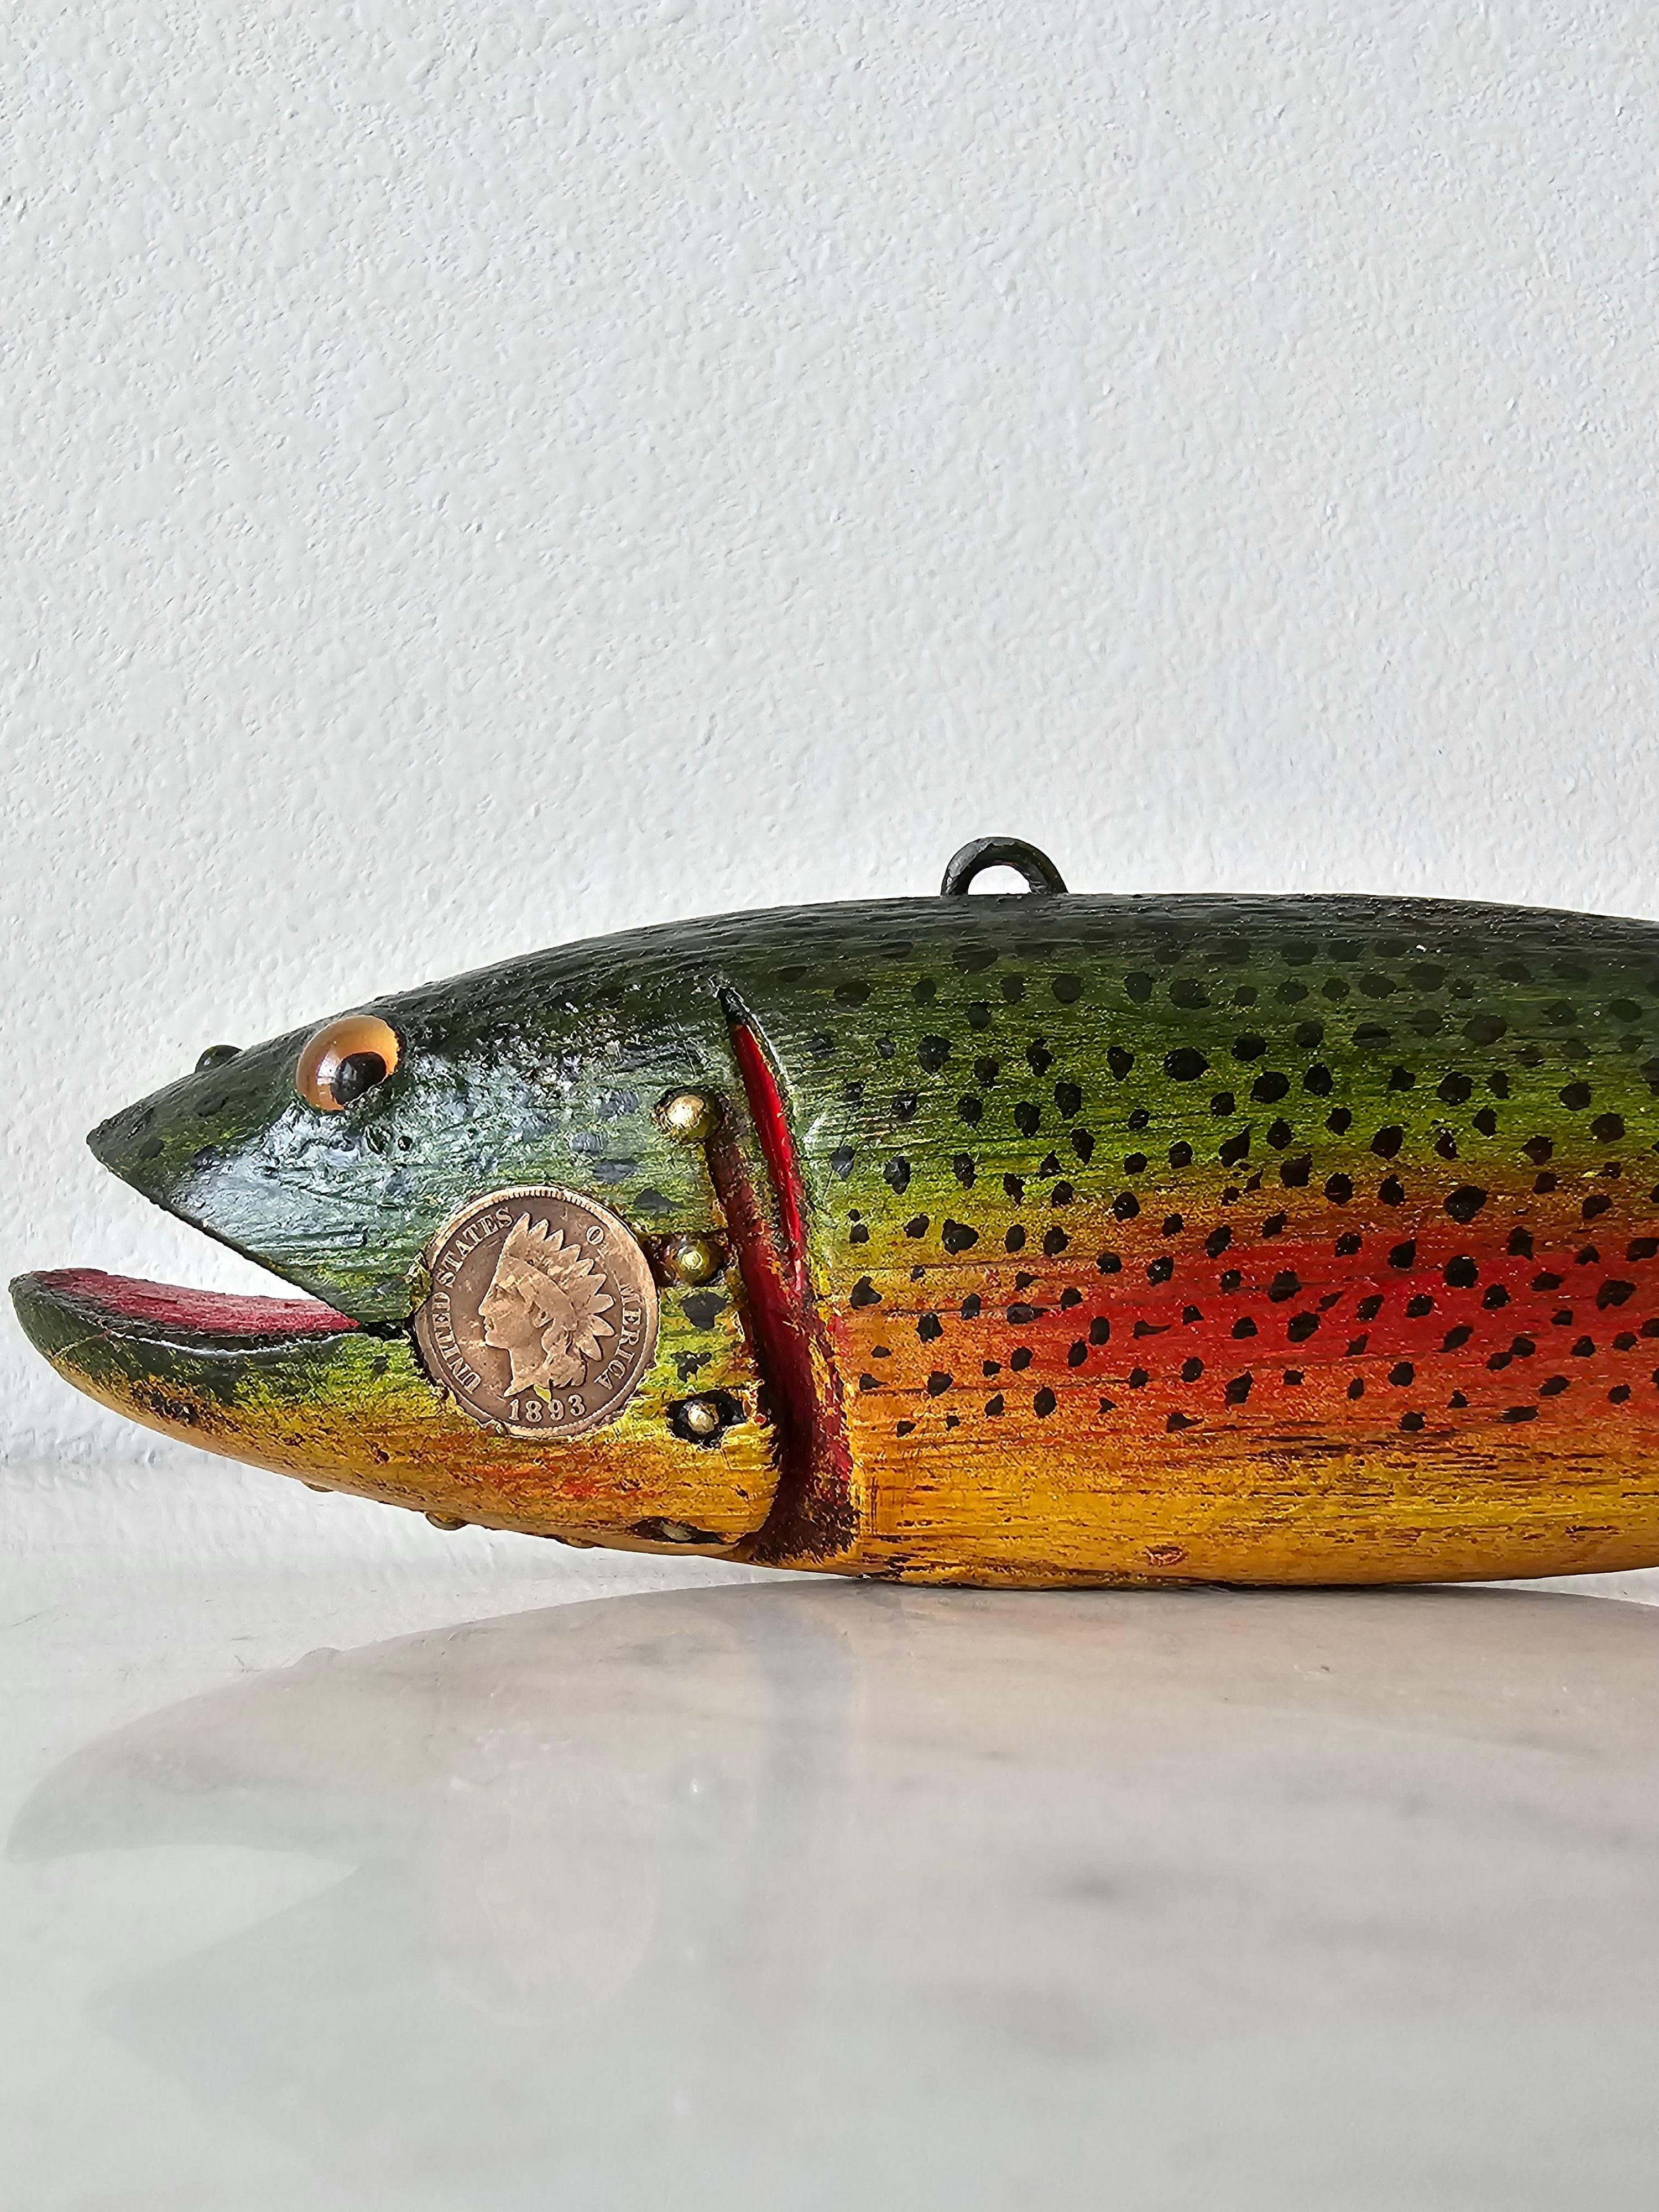 Vintage American Folk Art Duluth Fish Decoy Dfd Signed Carved Painted Trout 2